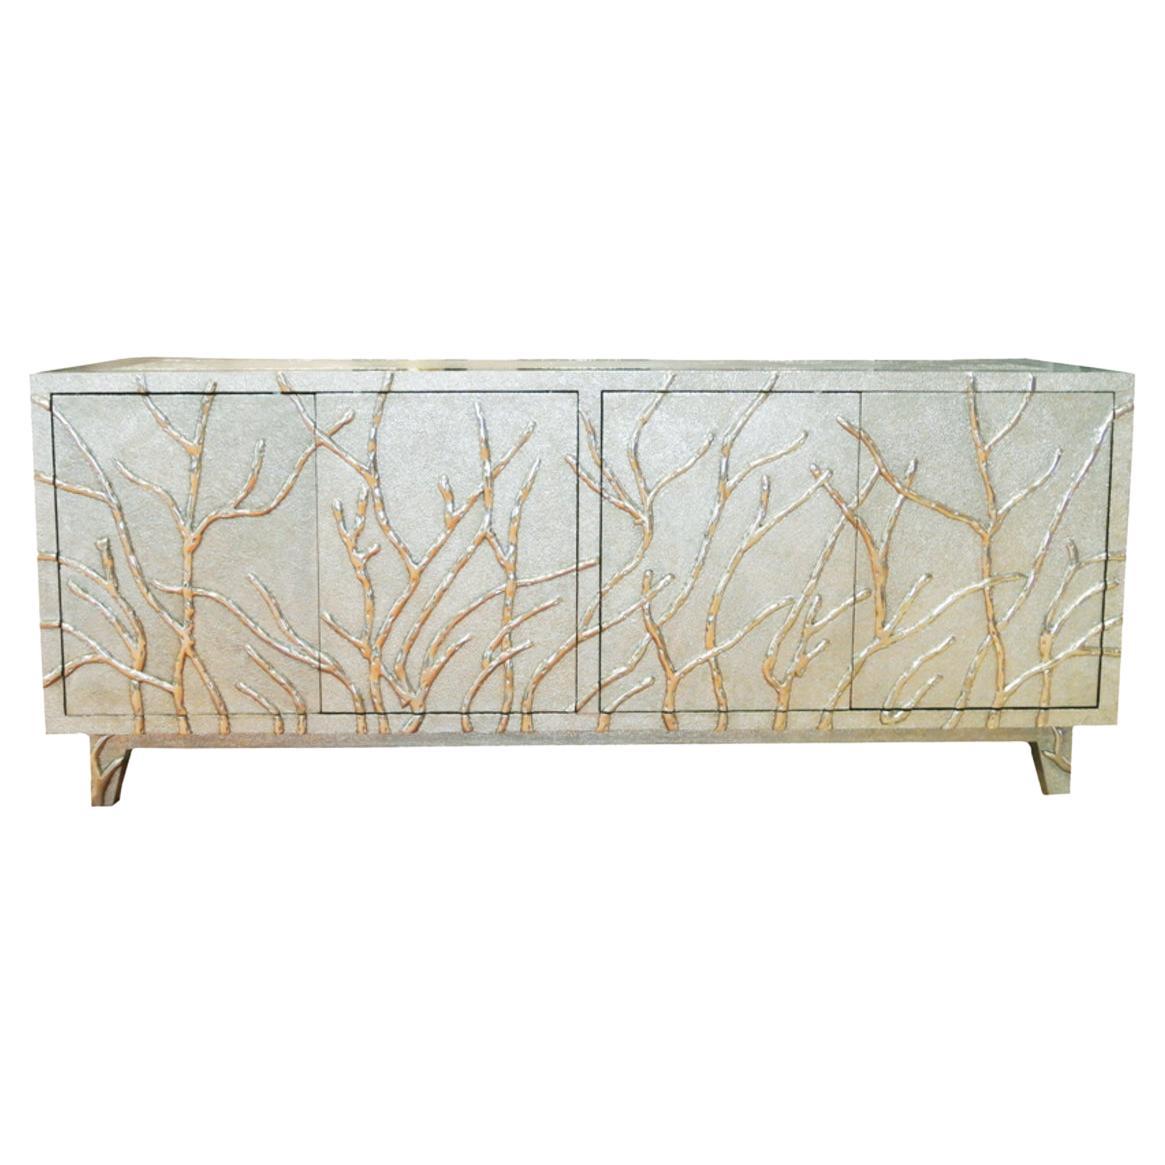 Twig Credenza Metal Clad Over MDF Handcrafted in India by Stephanie Odegard